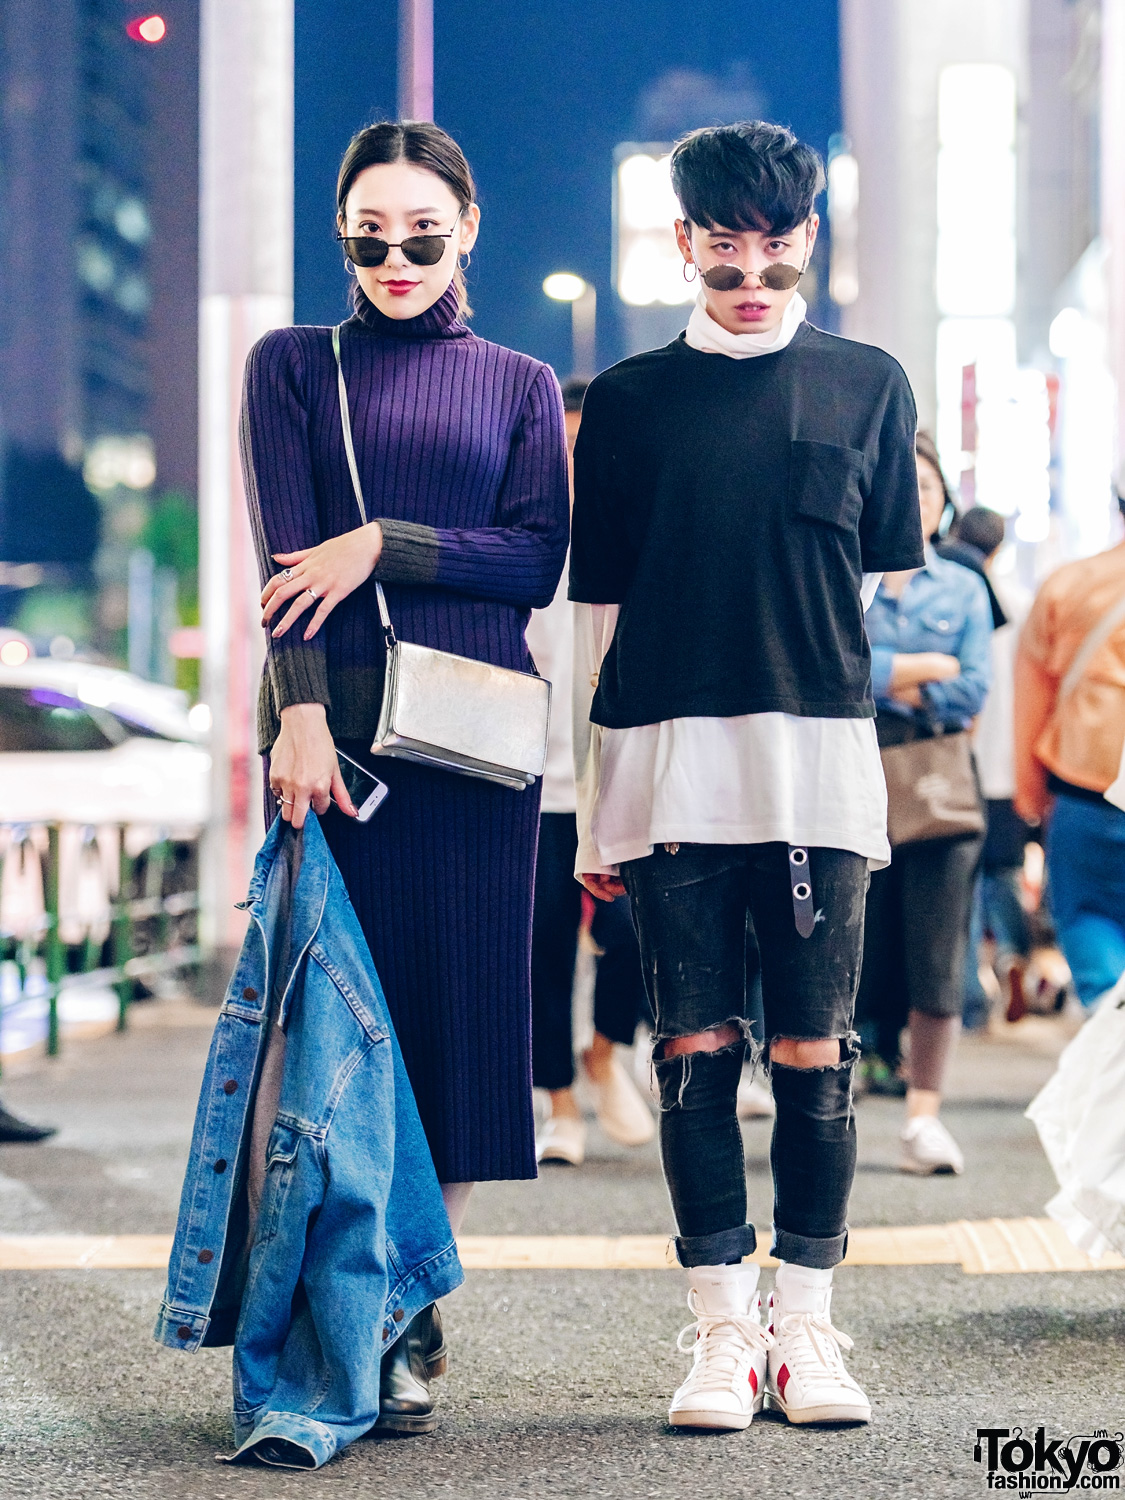 Harajuku Duo in Dark Streetwear w/ The Symbolic Tokyo, Dr. Martens, Chrome Hearts, Yves Saint Laurent & Black Means